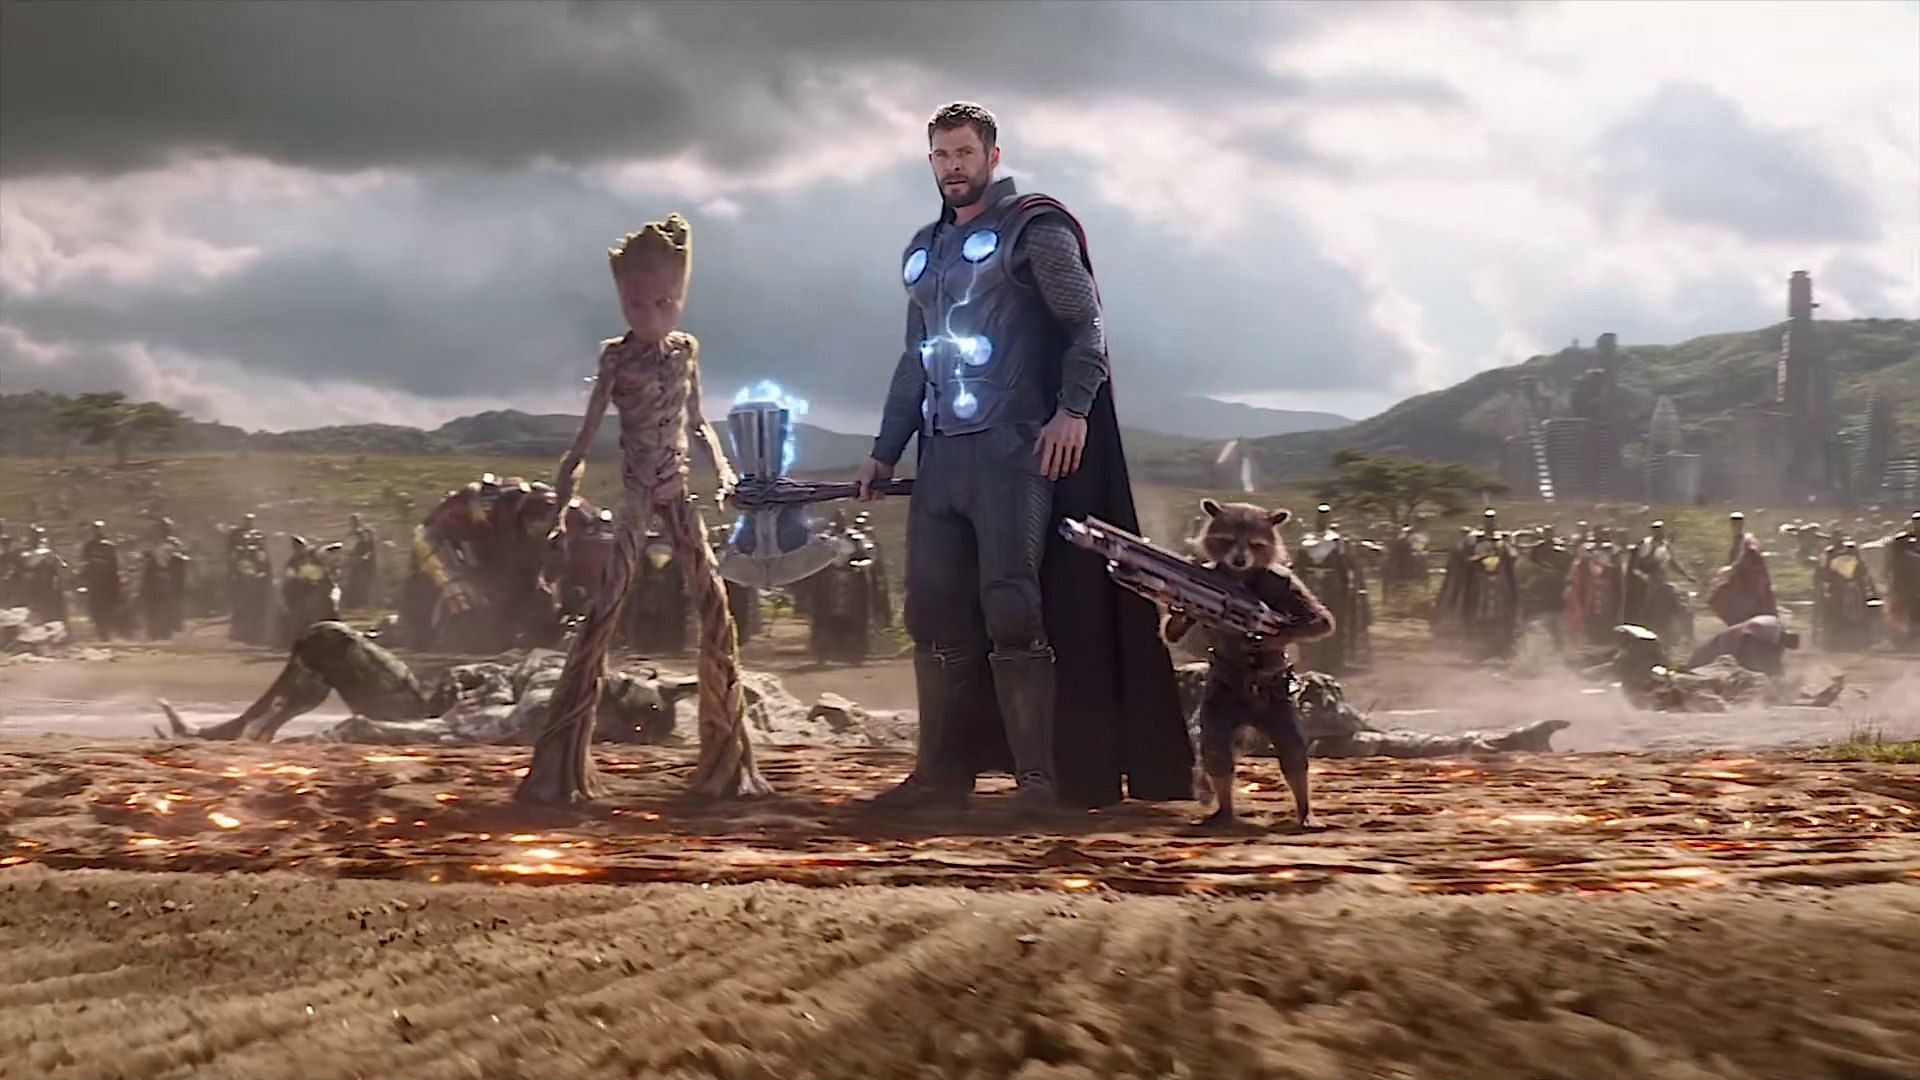 The God of Thunder, wielding Stormbreaker and ready to take on any challenge (Image via Marvel Studios)